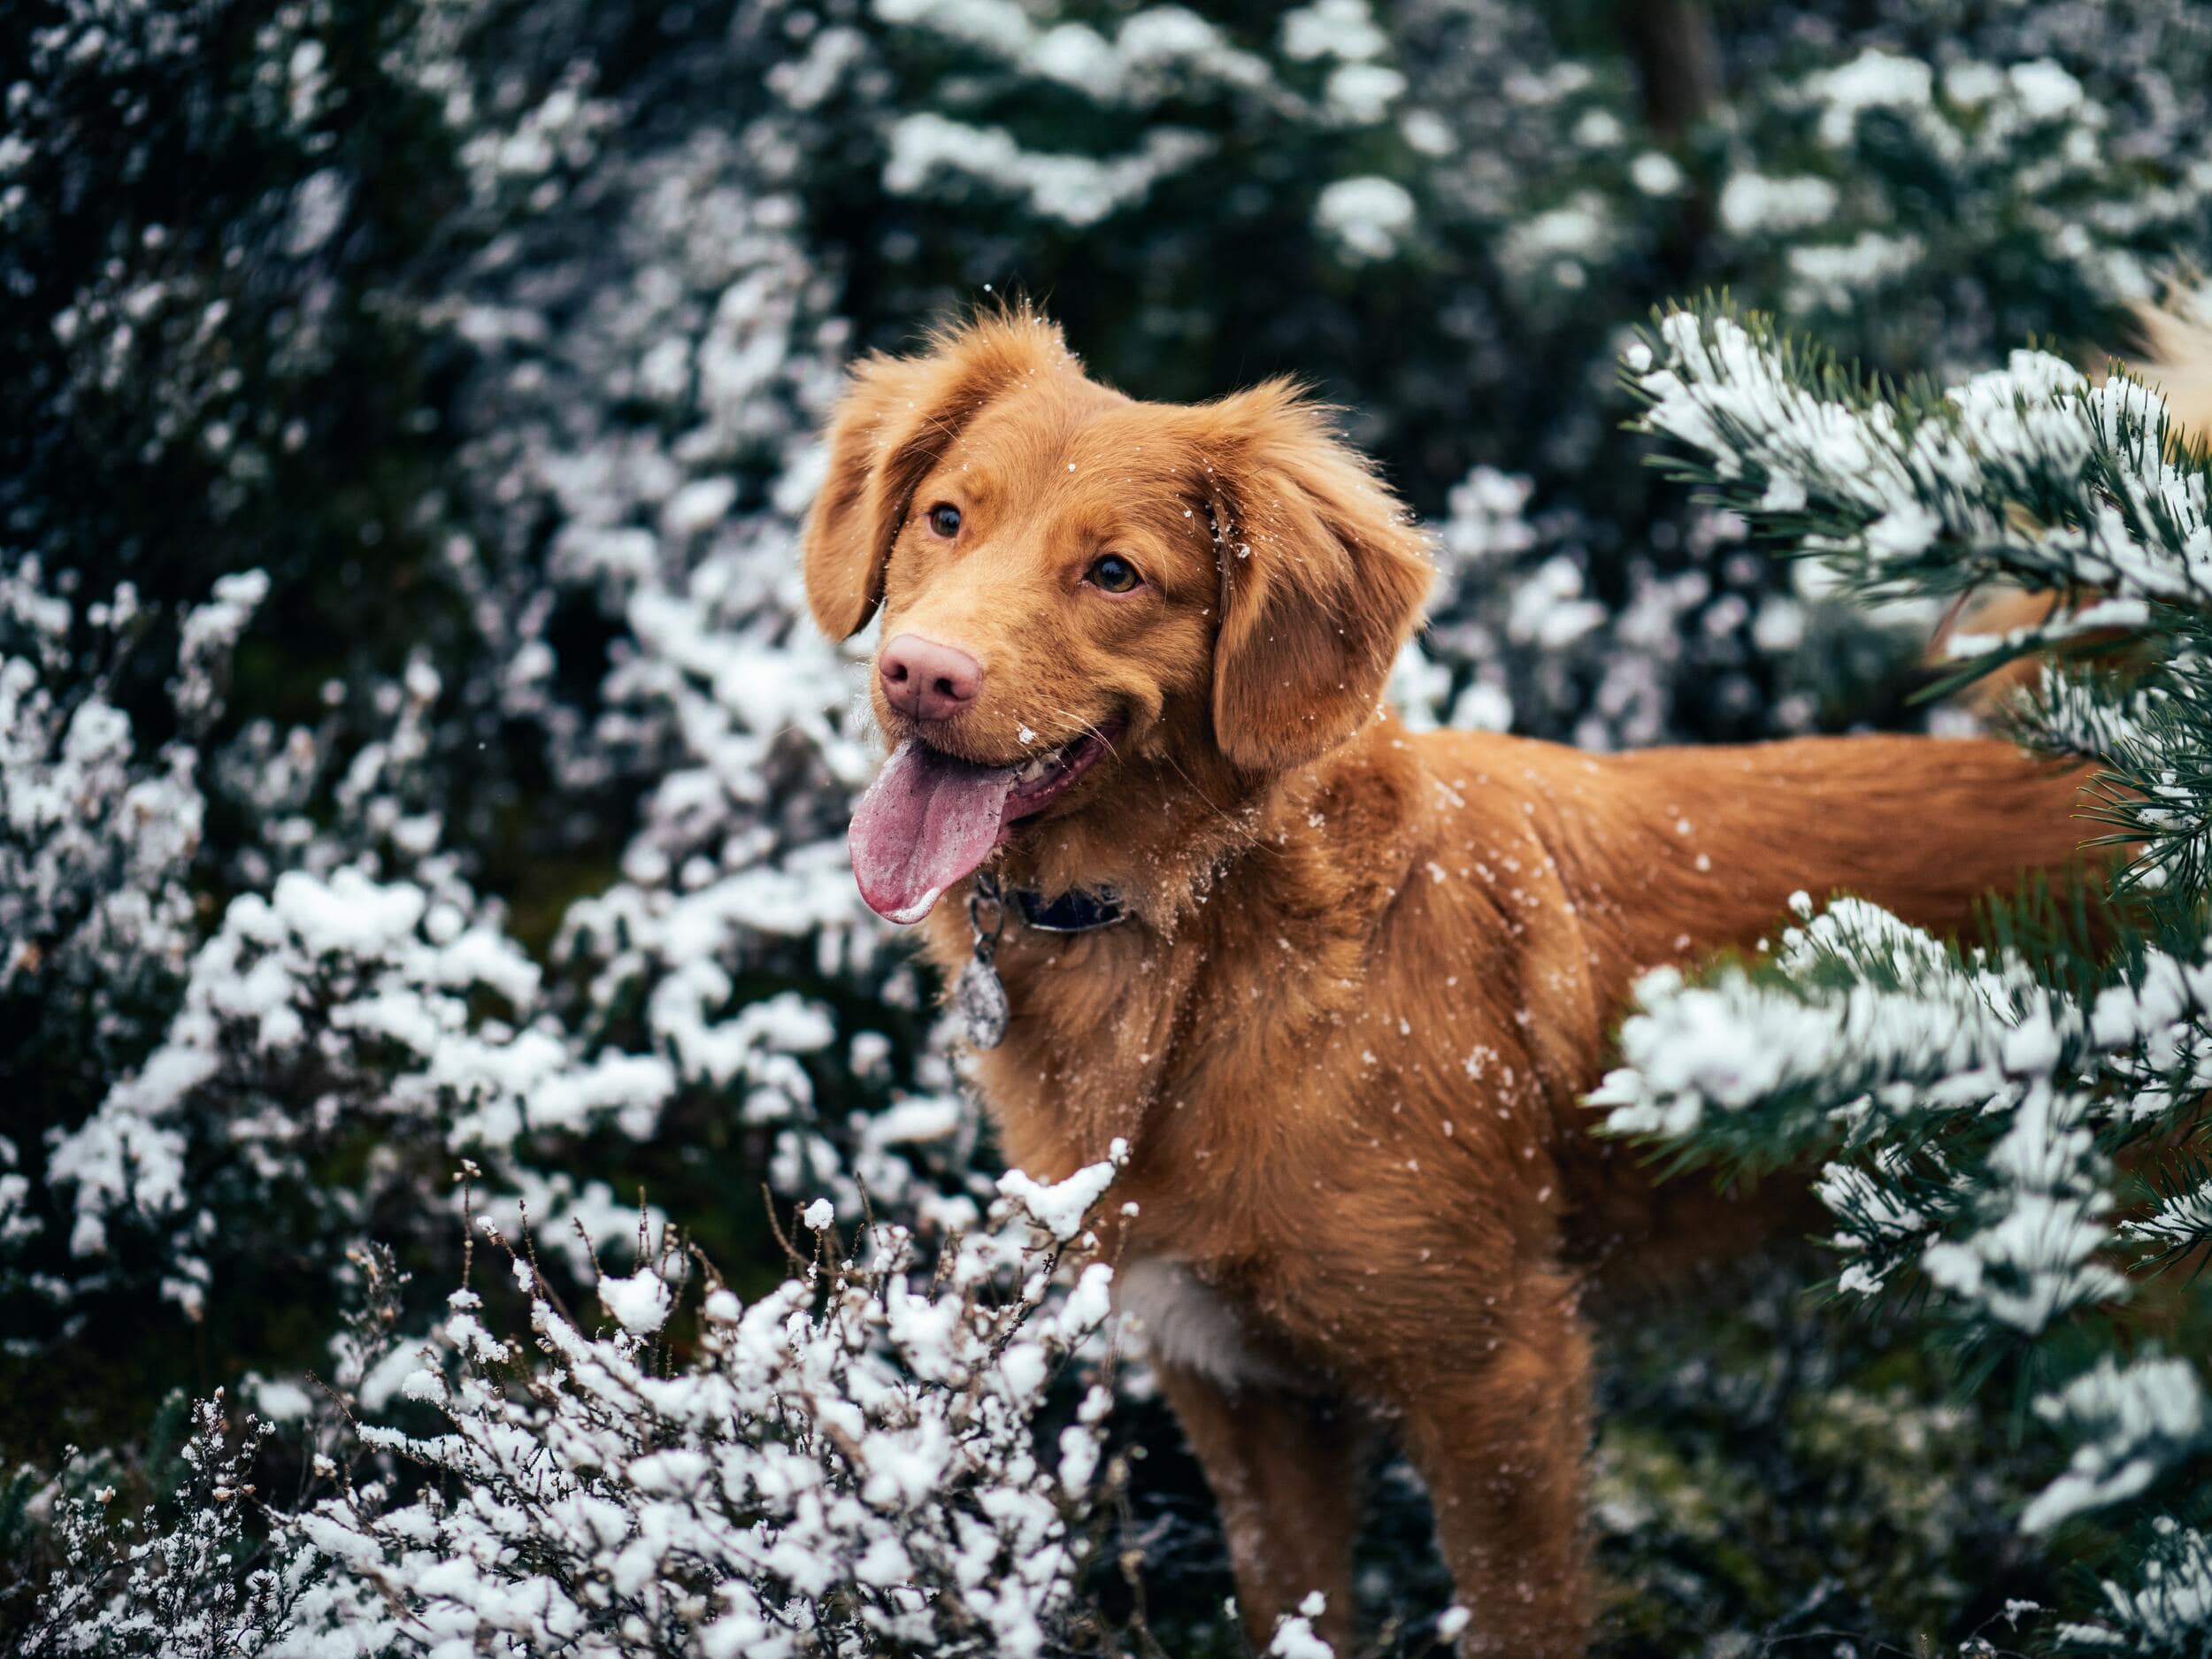 A dog stood outside surrounded by snowy trees